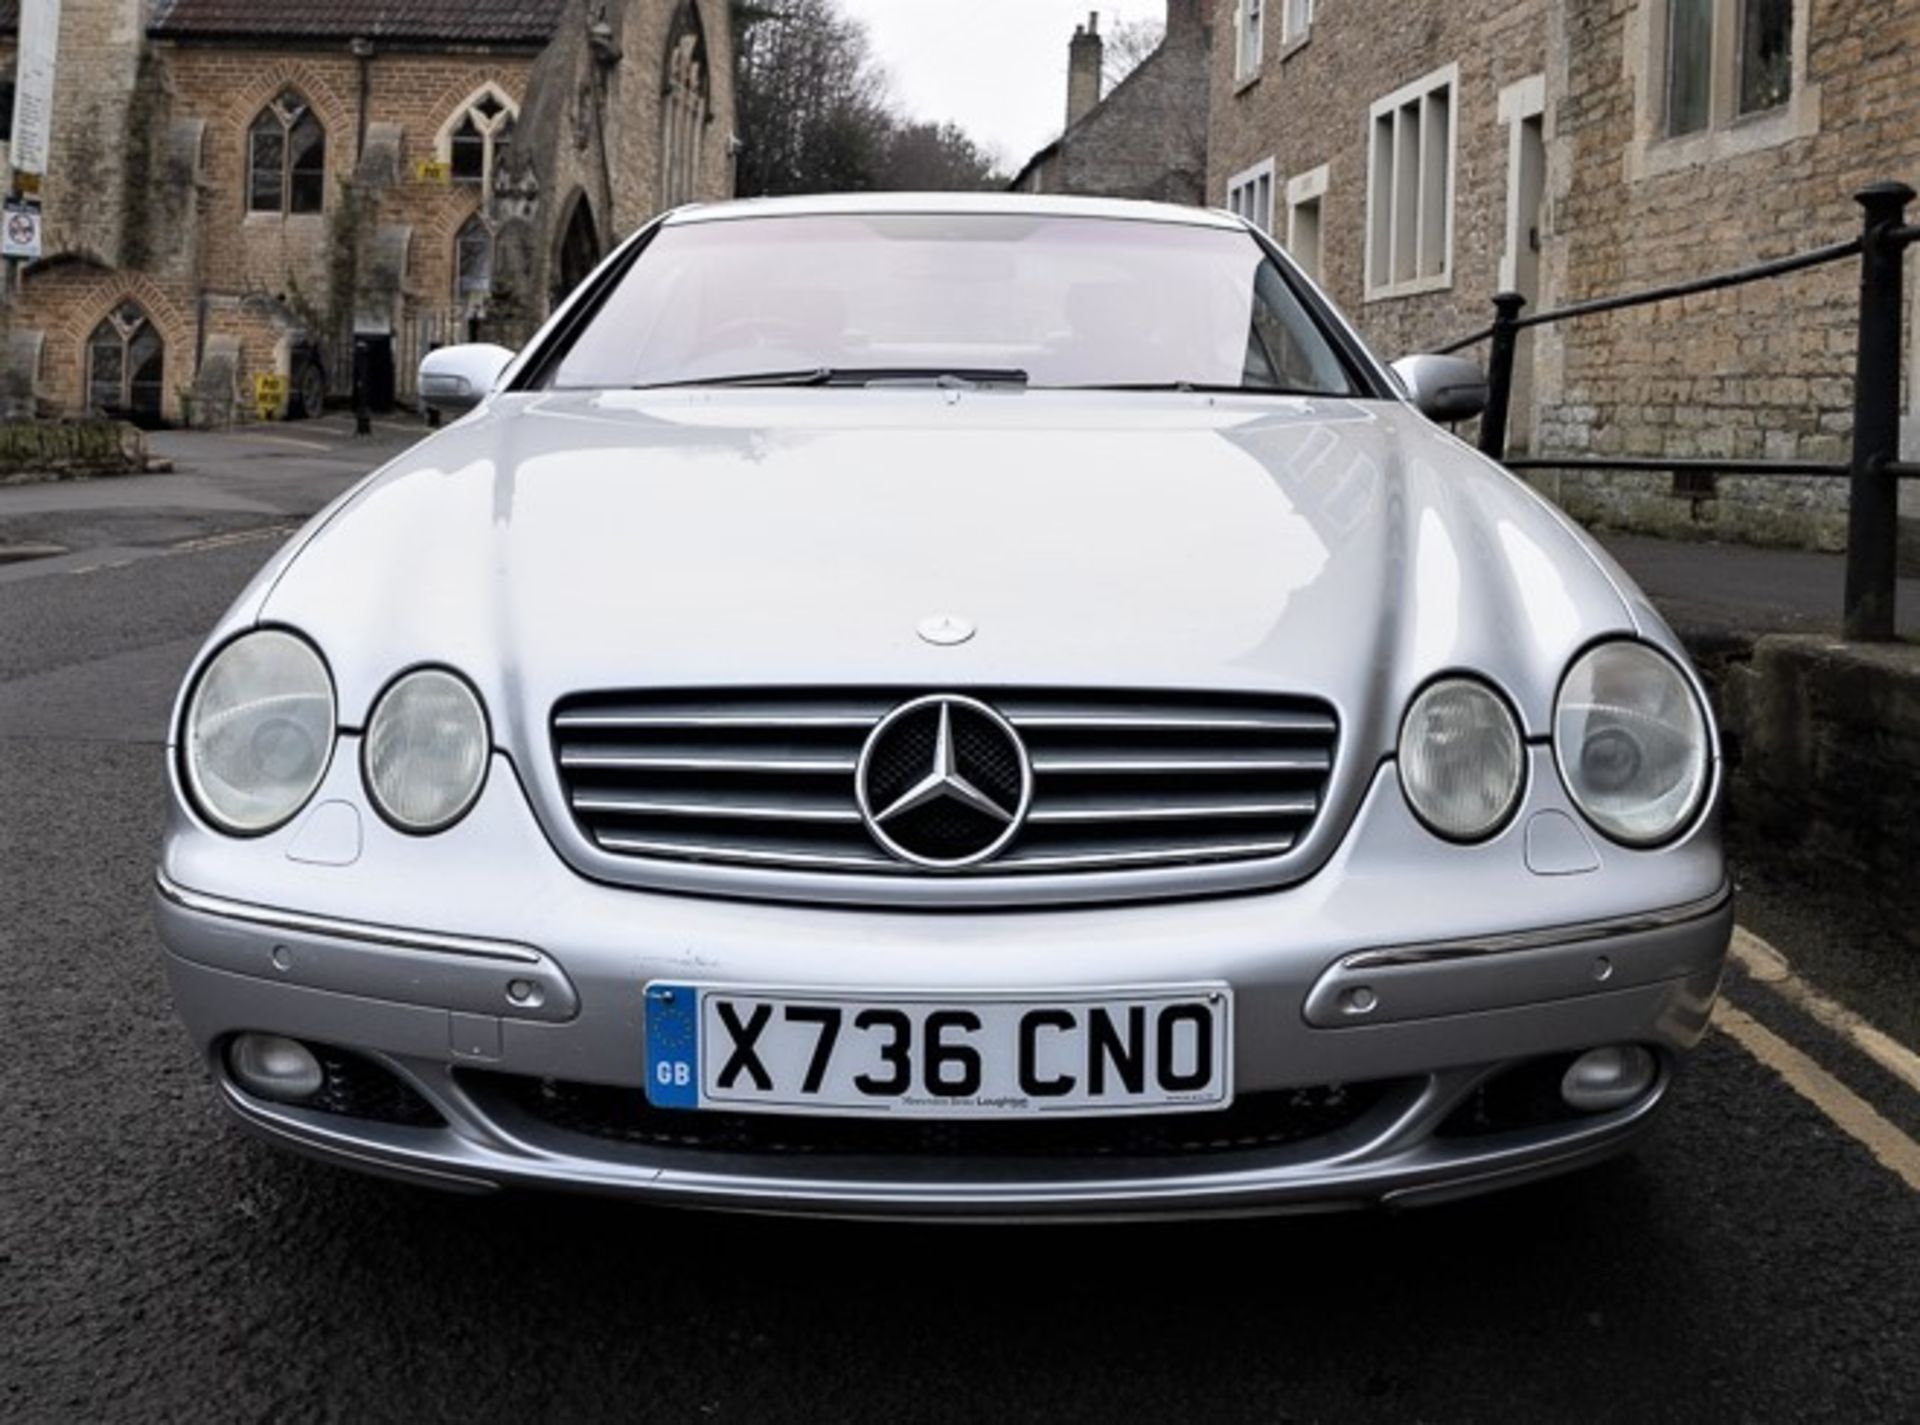 2000 Mercedes CL500 Coupe - Image 4 of 13